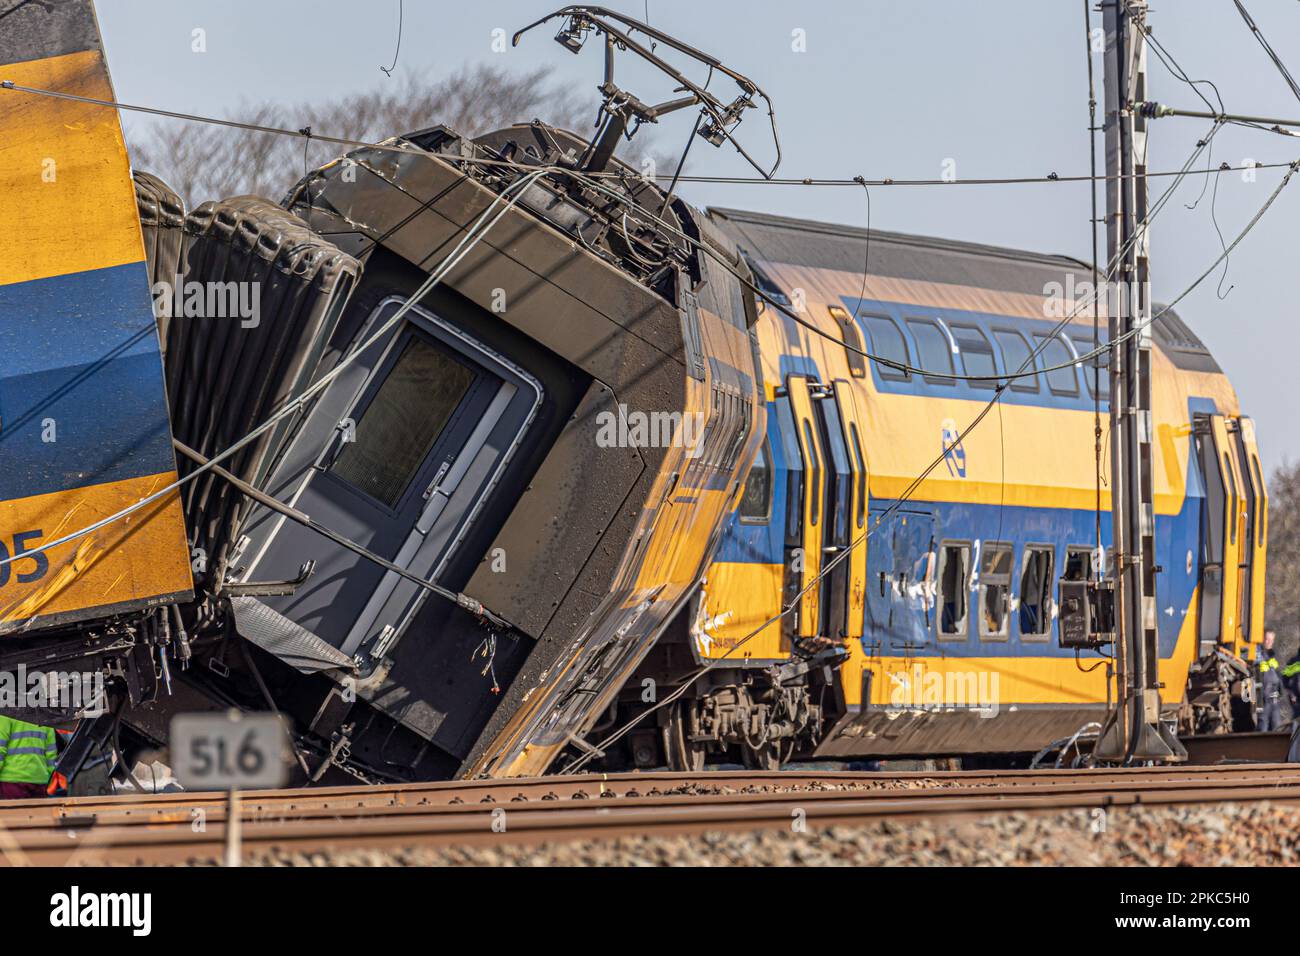 Voorschoten, Netherlands. 04th Apr, 2023. A view of a damaged carriage. A train collided with heavy construction equipment and derailment of the carriages near Leiden and the Hague. The Dutch railway crash resulted deadly, killing one person and injuring 30. Emergency services workers and police were on the scene to assess the damage. The accident took place in Voorschoten in the Netherlands. Credit: SOPA Images Limited/Alamy Live News Stock Photo